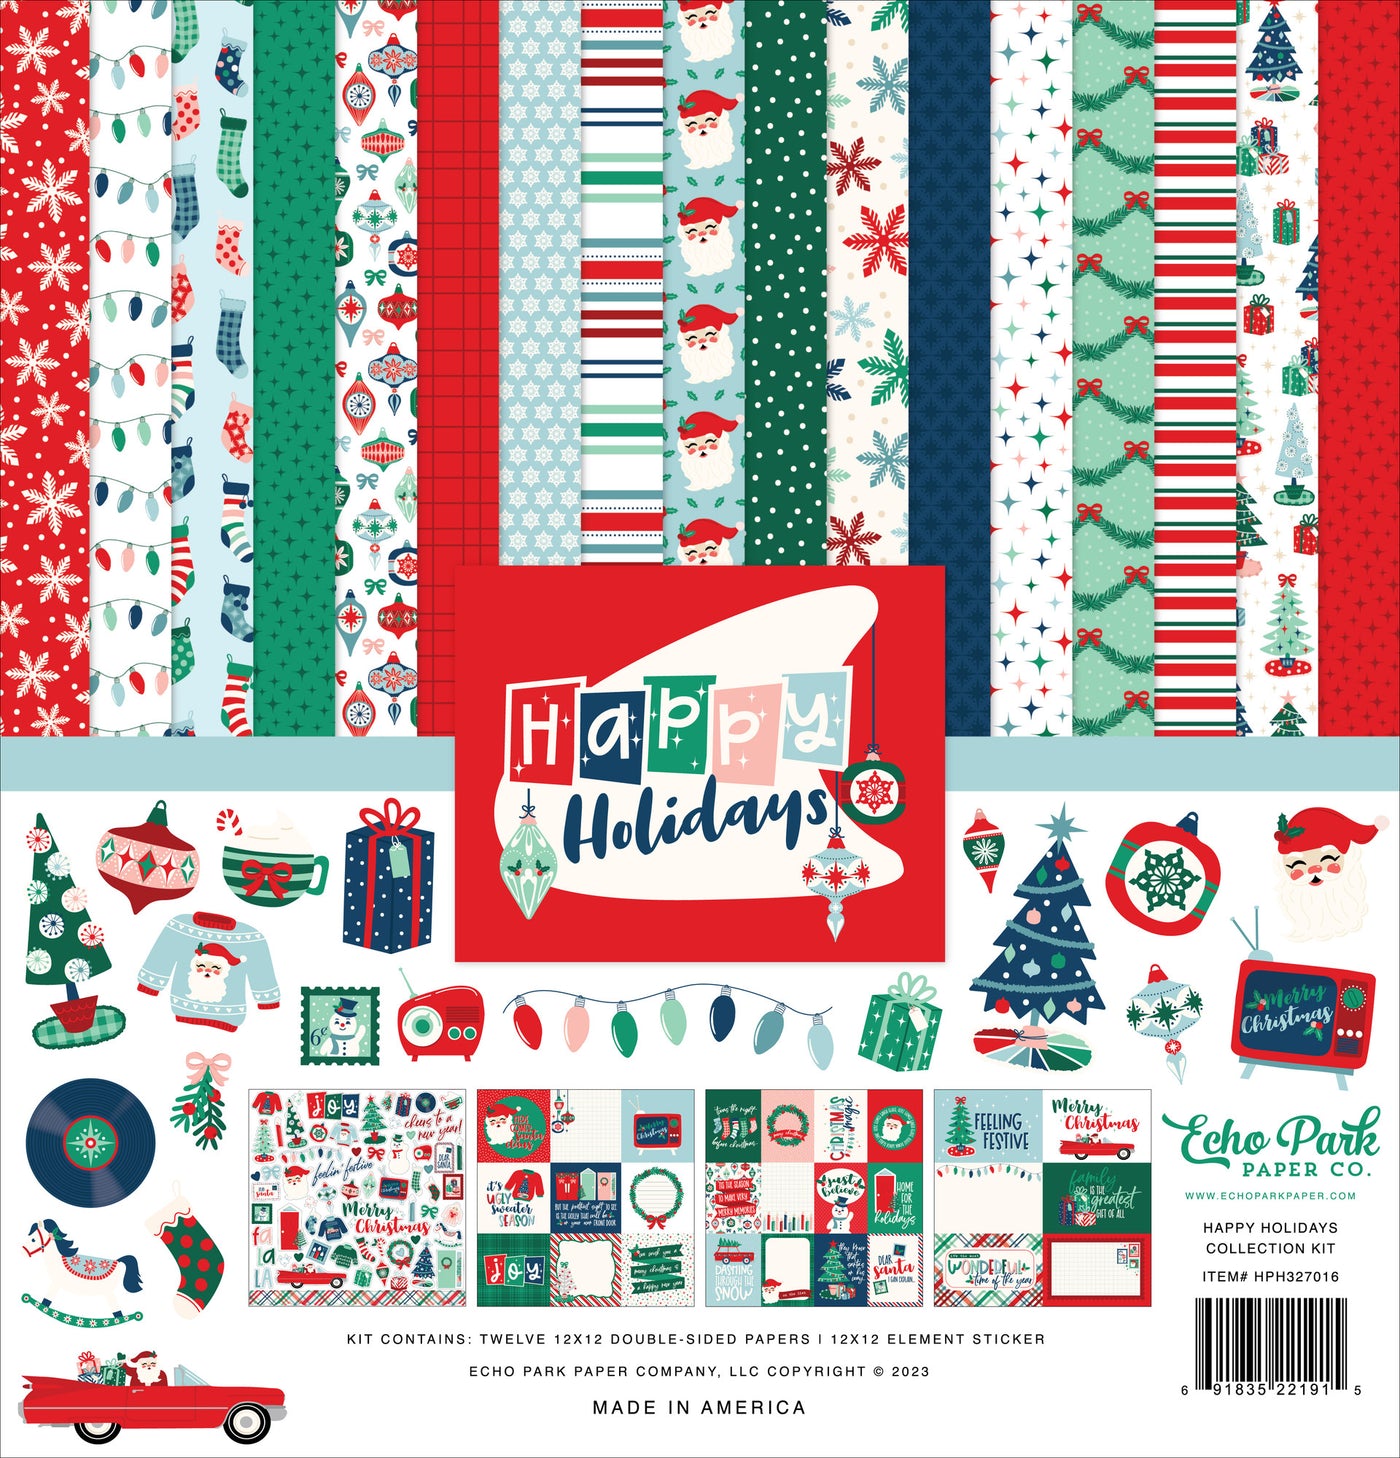 Happy Holidays Collection Kit by Echo Park - The kit contains 12 double-sided papers that feature all the fun reasons we love Christmas. The kit includes a 12x12 sheet of themed Element stickers by Echo Park.